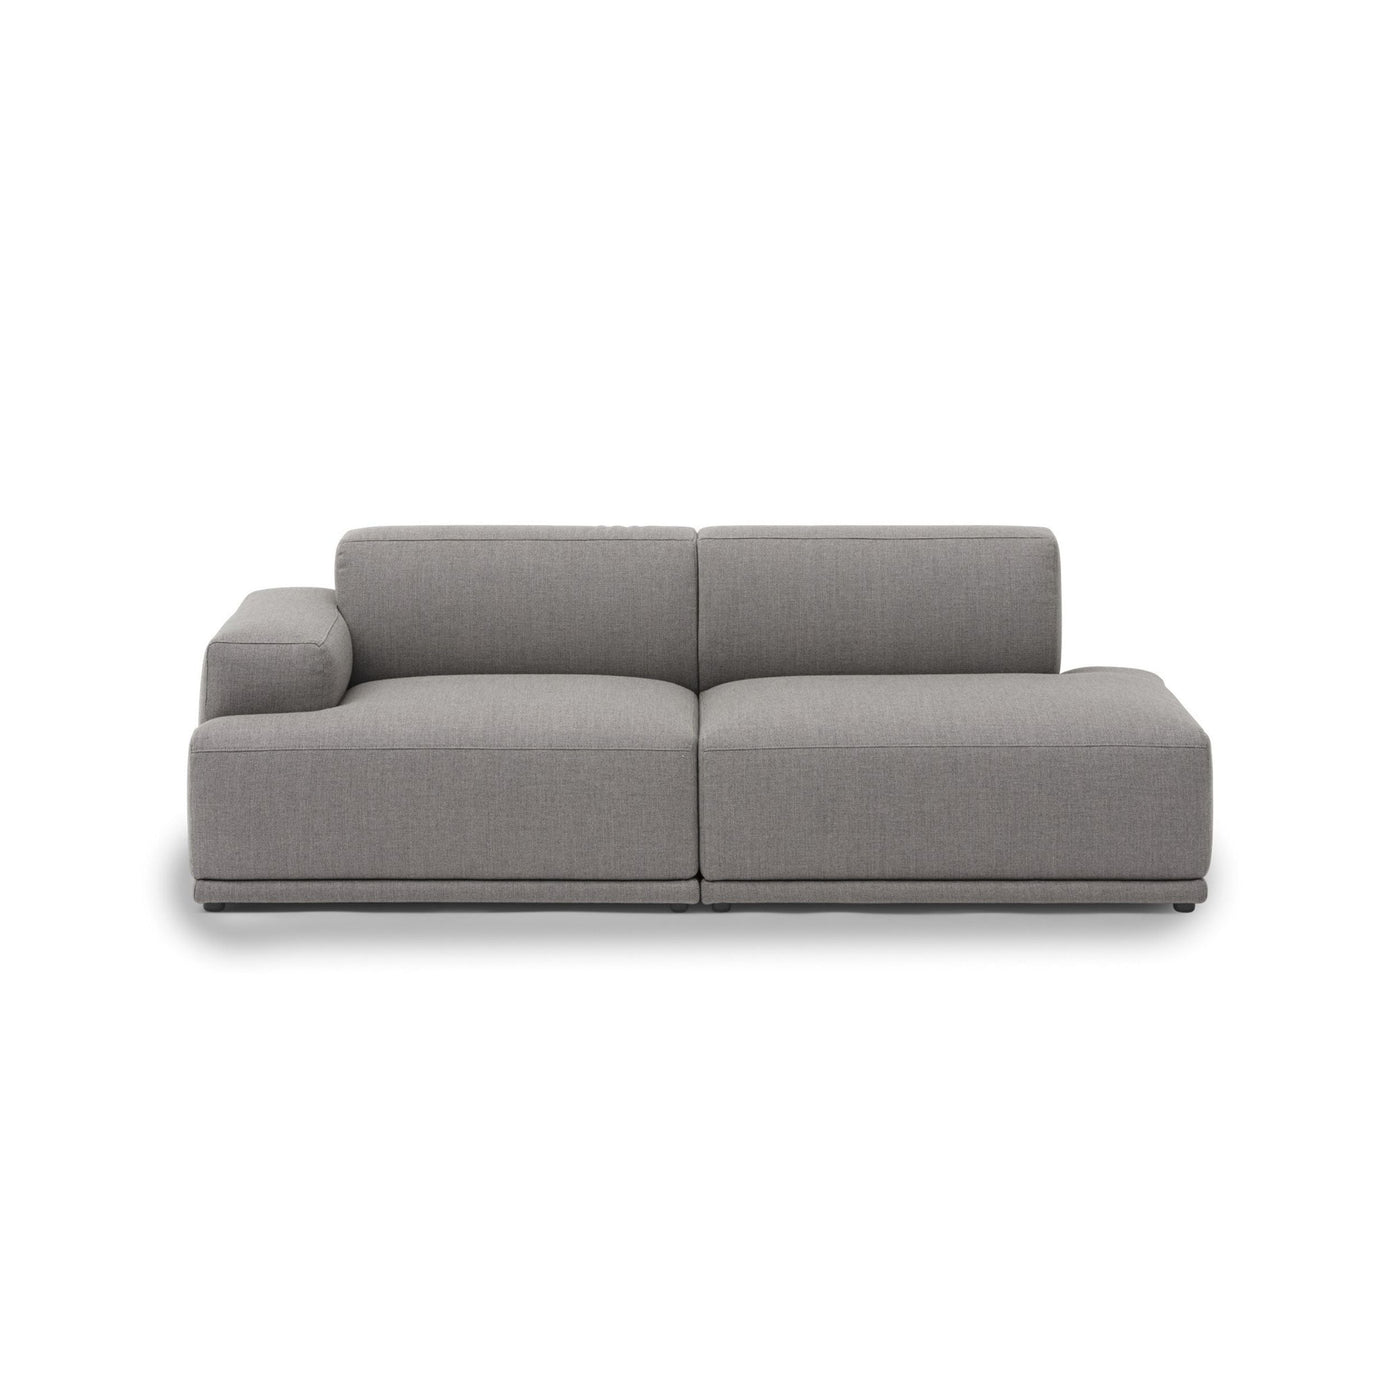 Muuto Connect Soft Modular 2 Seater Sofa, configuration 2. made-to-order from someday designs. #colour_re-wool-128